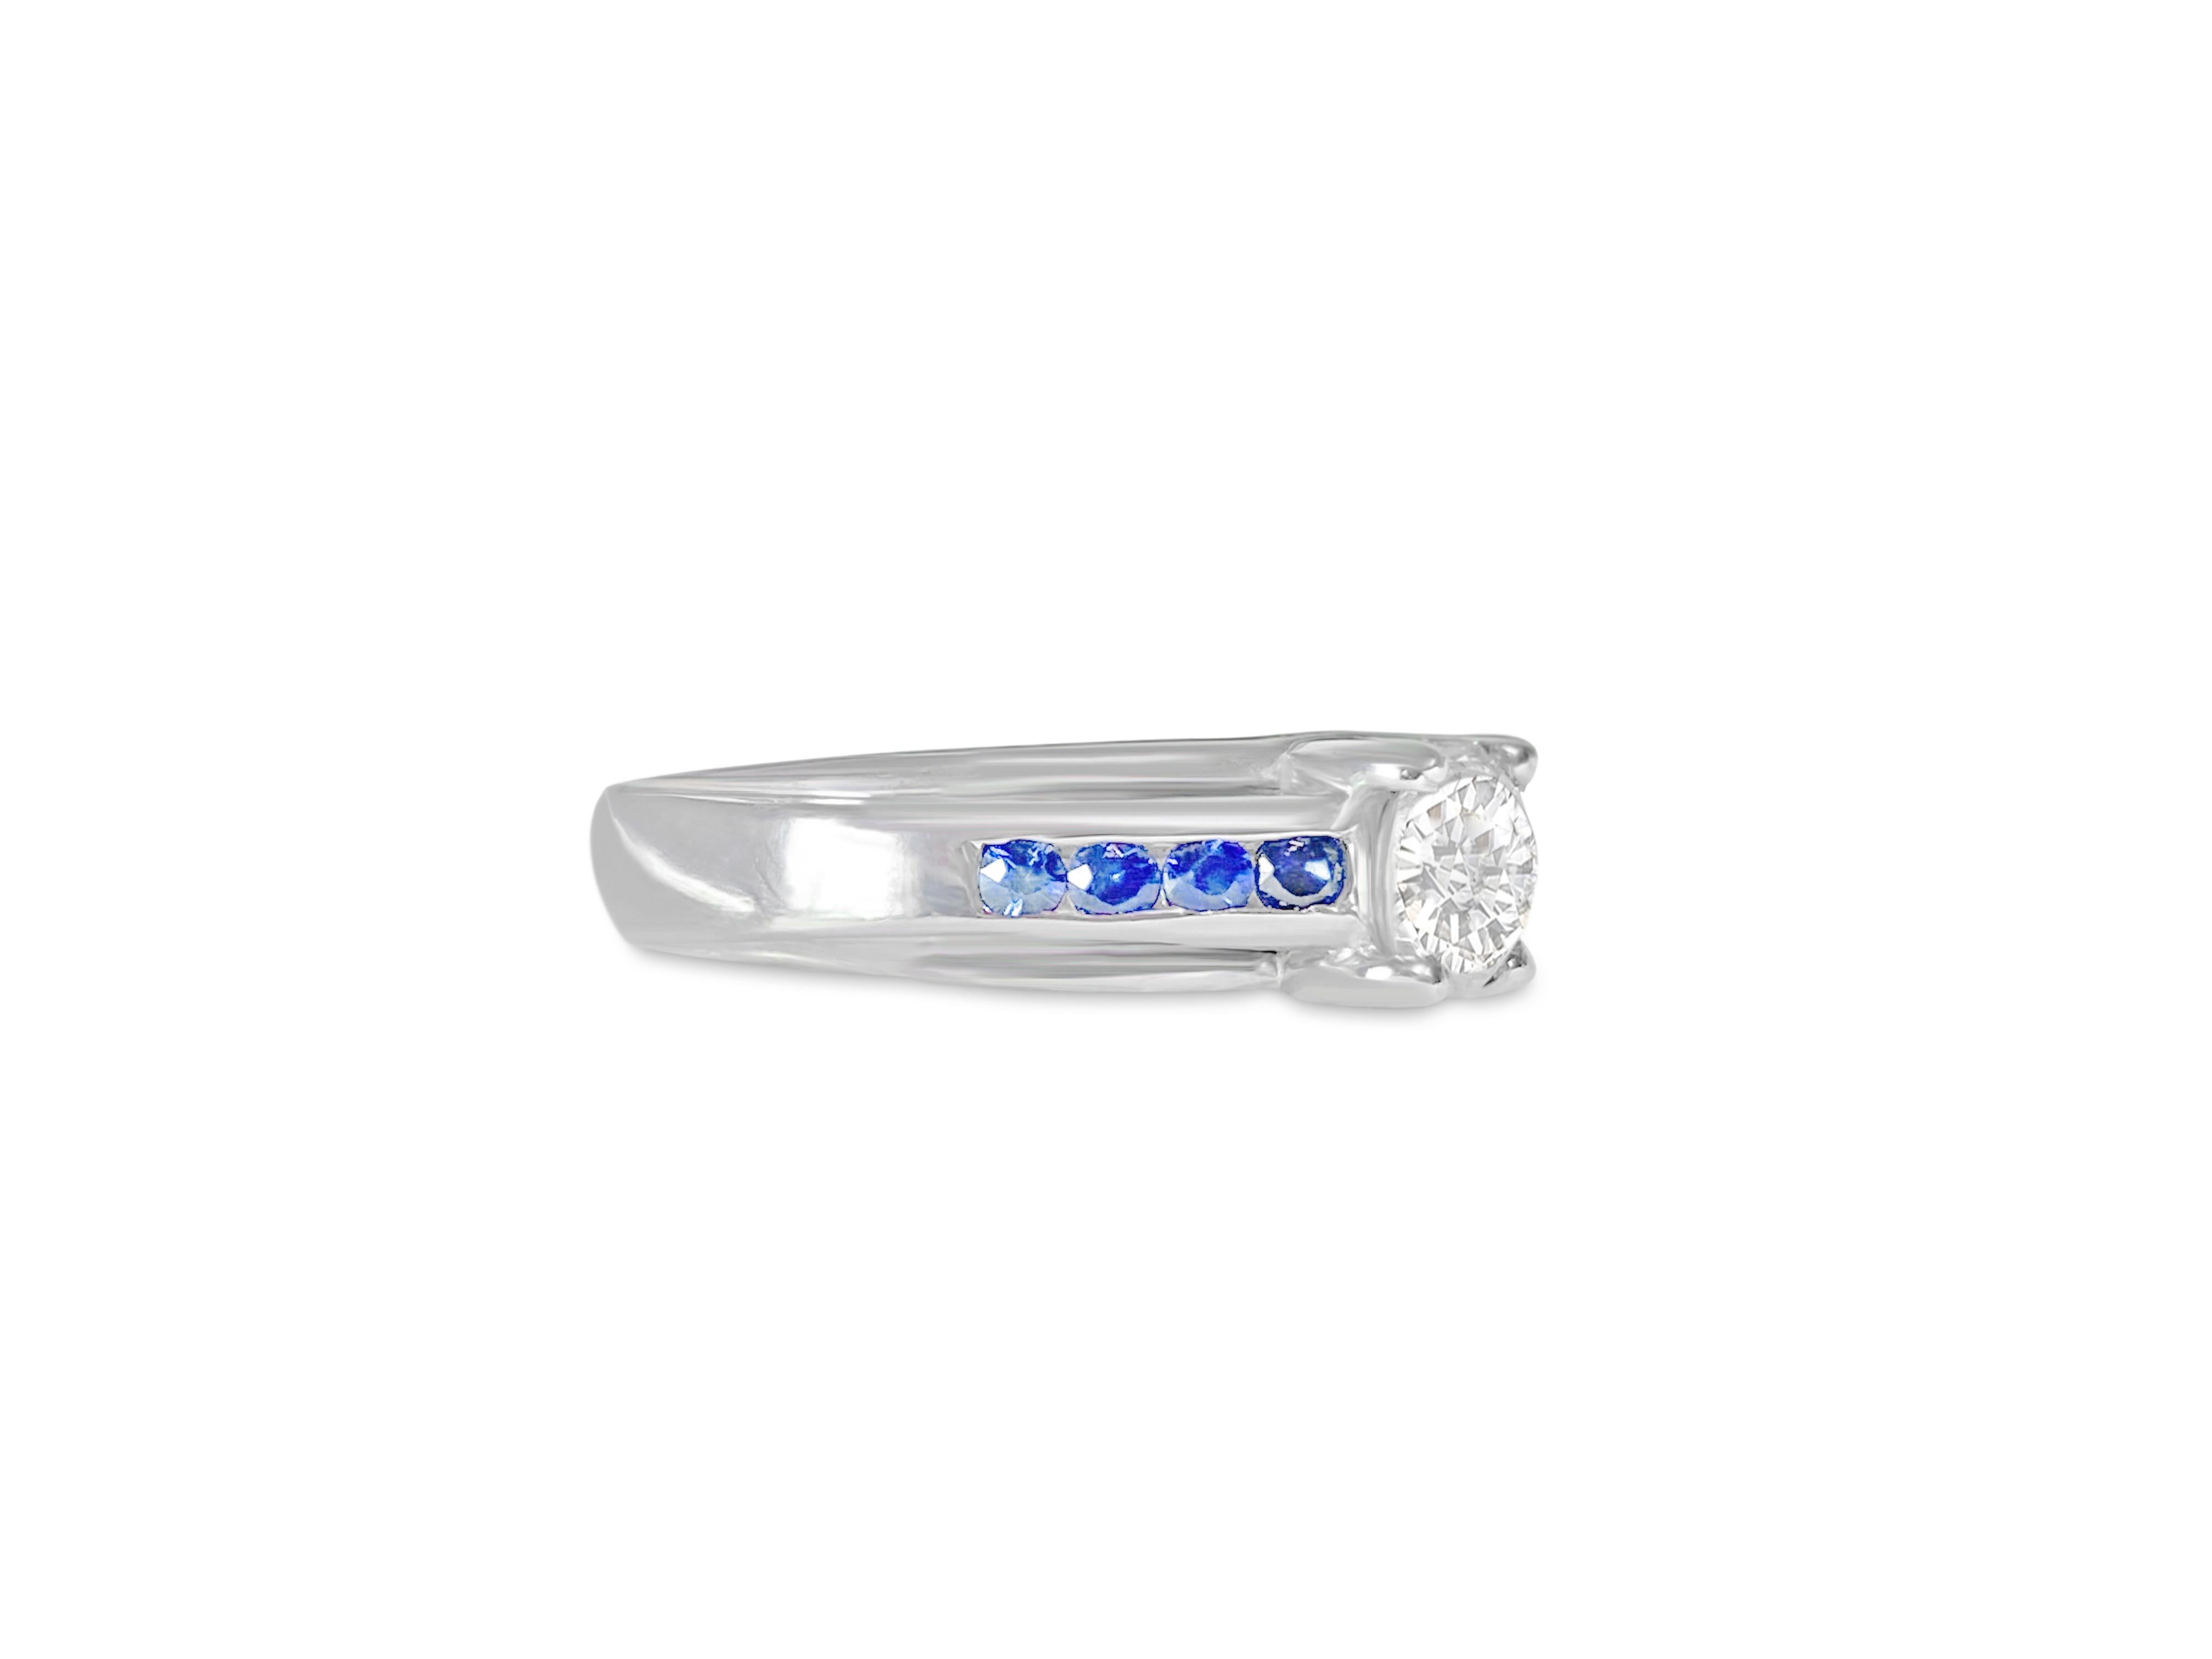 Metal: 18K white gold.

Diamond: 1.10 carat. Round brilliant cut set in prong setting. SI3 Clarity and G color.

Blue sapphire: 0.60 cwt. Cornflower blue sapphires set in channel setting. Round cut sapphires.

All stones are 100% natural earth